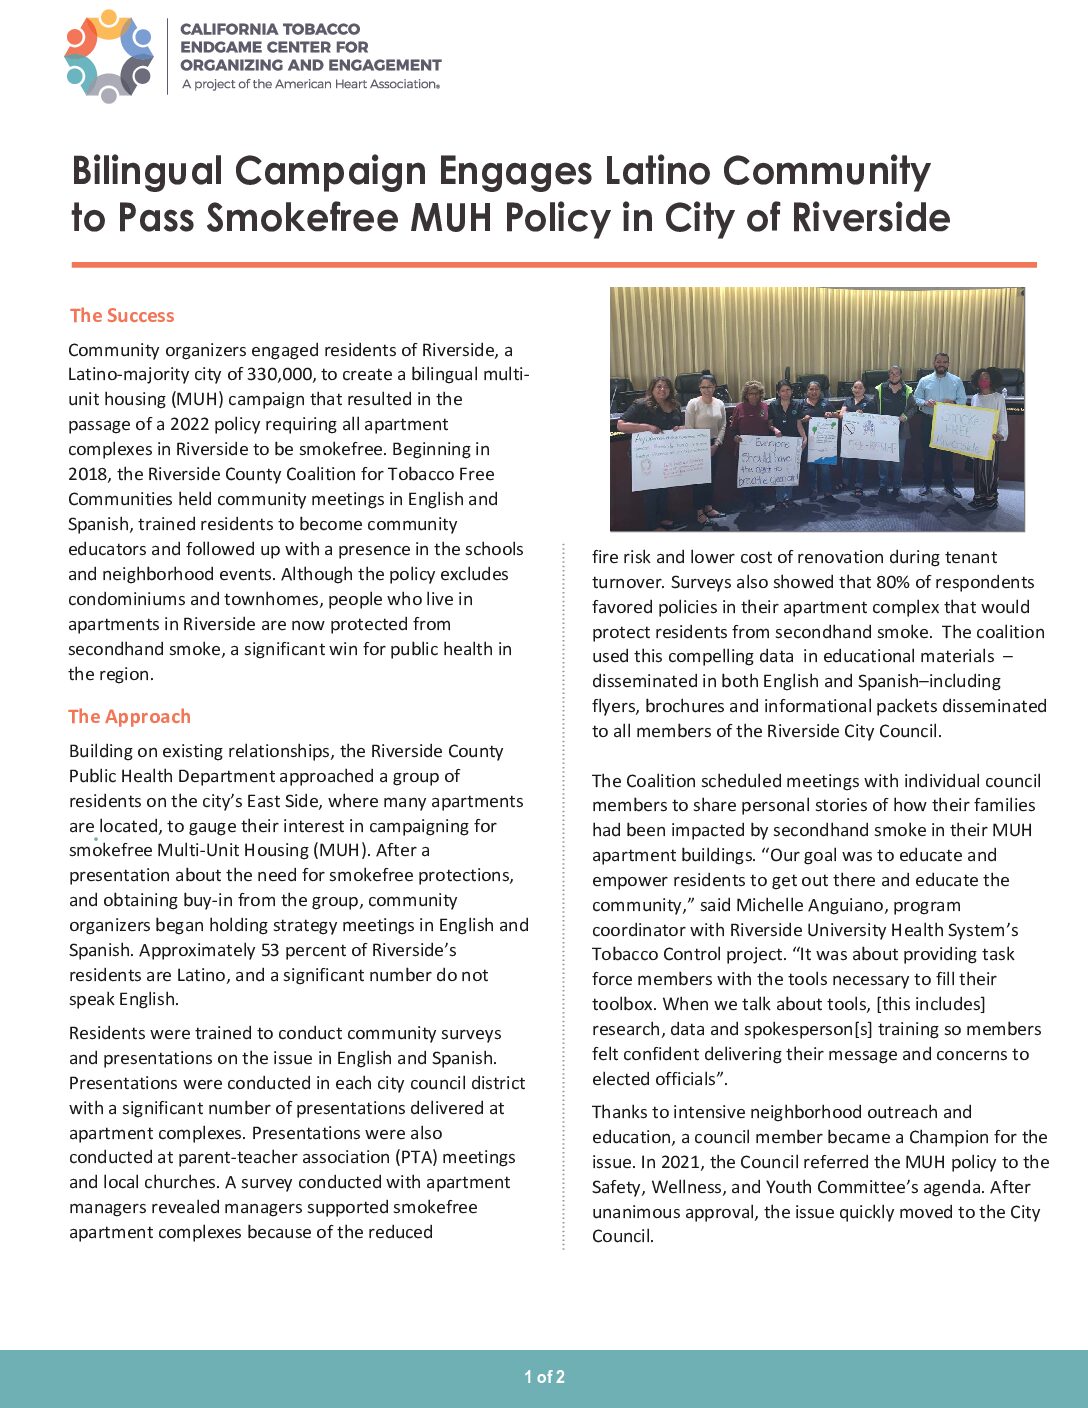 Community organizers engaged residents of Riverside, a Latino-majority city of 330,000, to create a bilingual multi-unit housing (MUH) campaign that resulted in the passage of a 2022 policy requiring all apartment complexes in Riverside to be smokefree.